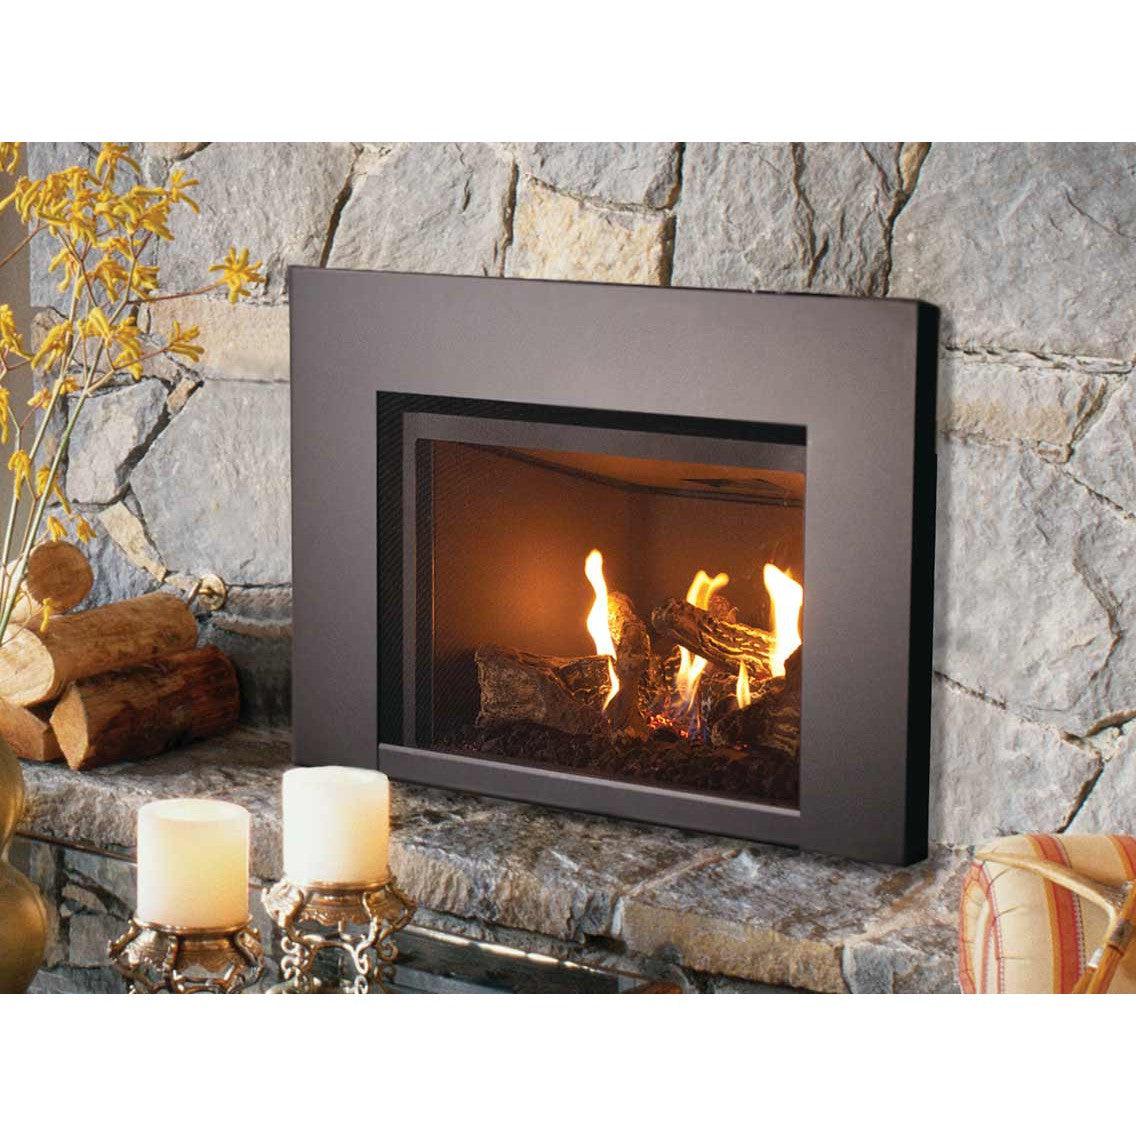 Insulating a direct vent gas fireplace. - Fine Homebuilding